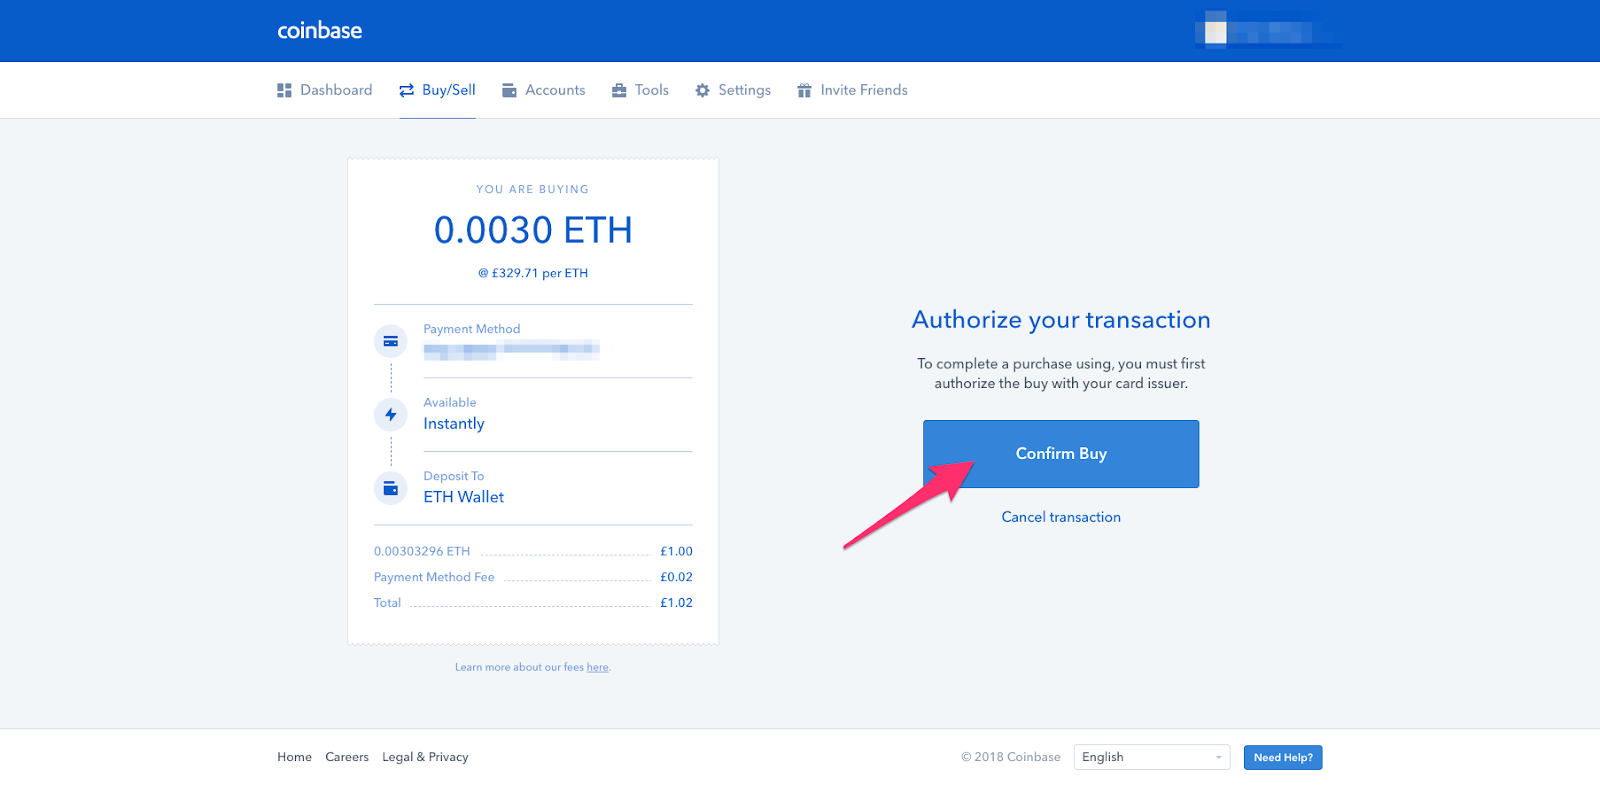 How Long For Coinbase Credit Card Can A Passport Be Used In Coinbase - 